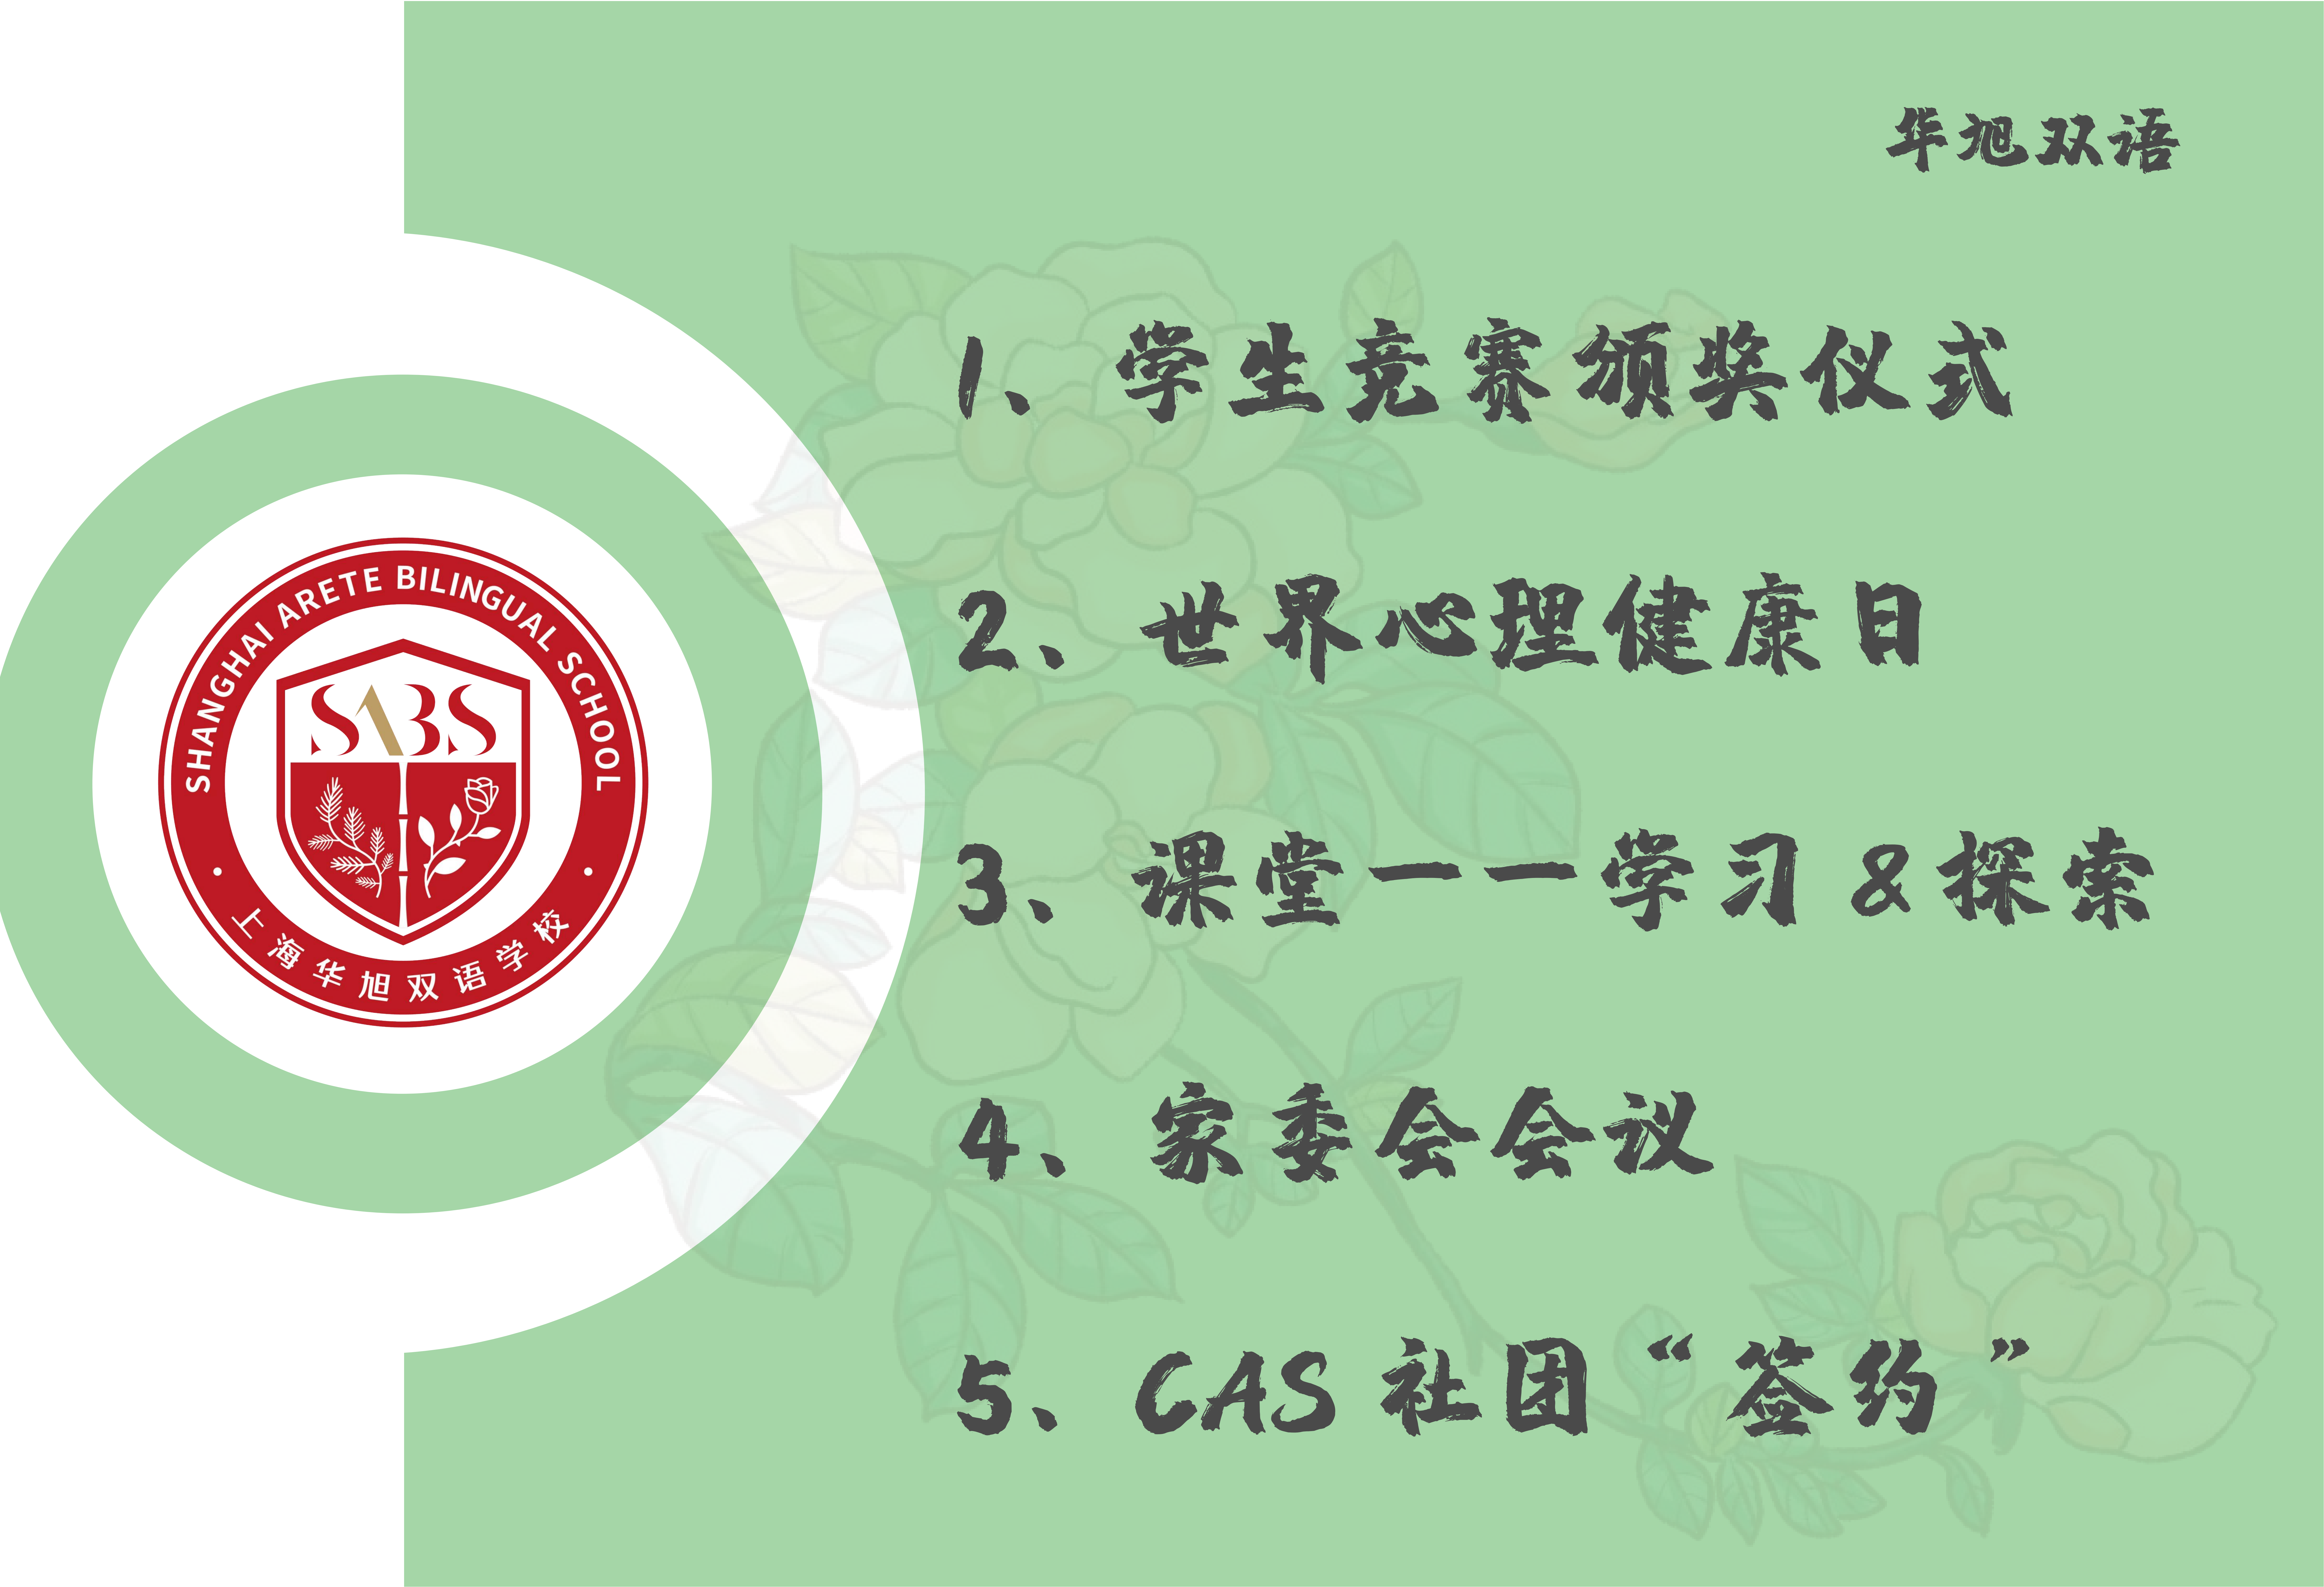 HS 6:7th Week Newsletter (Chinese 2022-2023 1st semester)_01.png